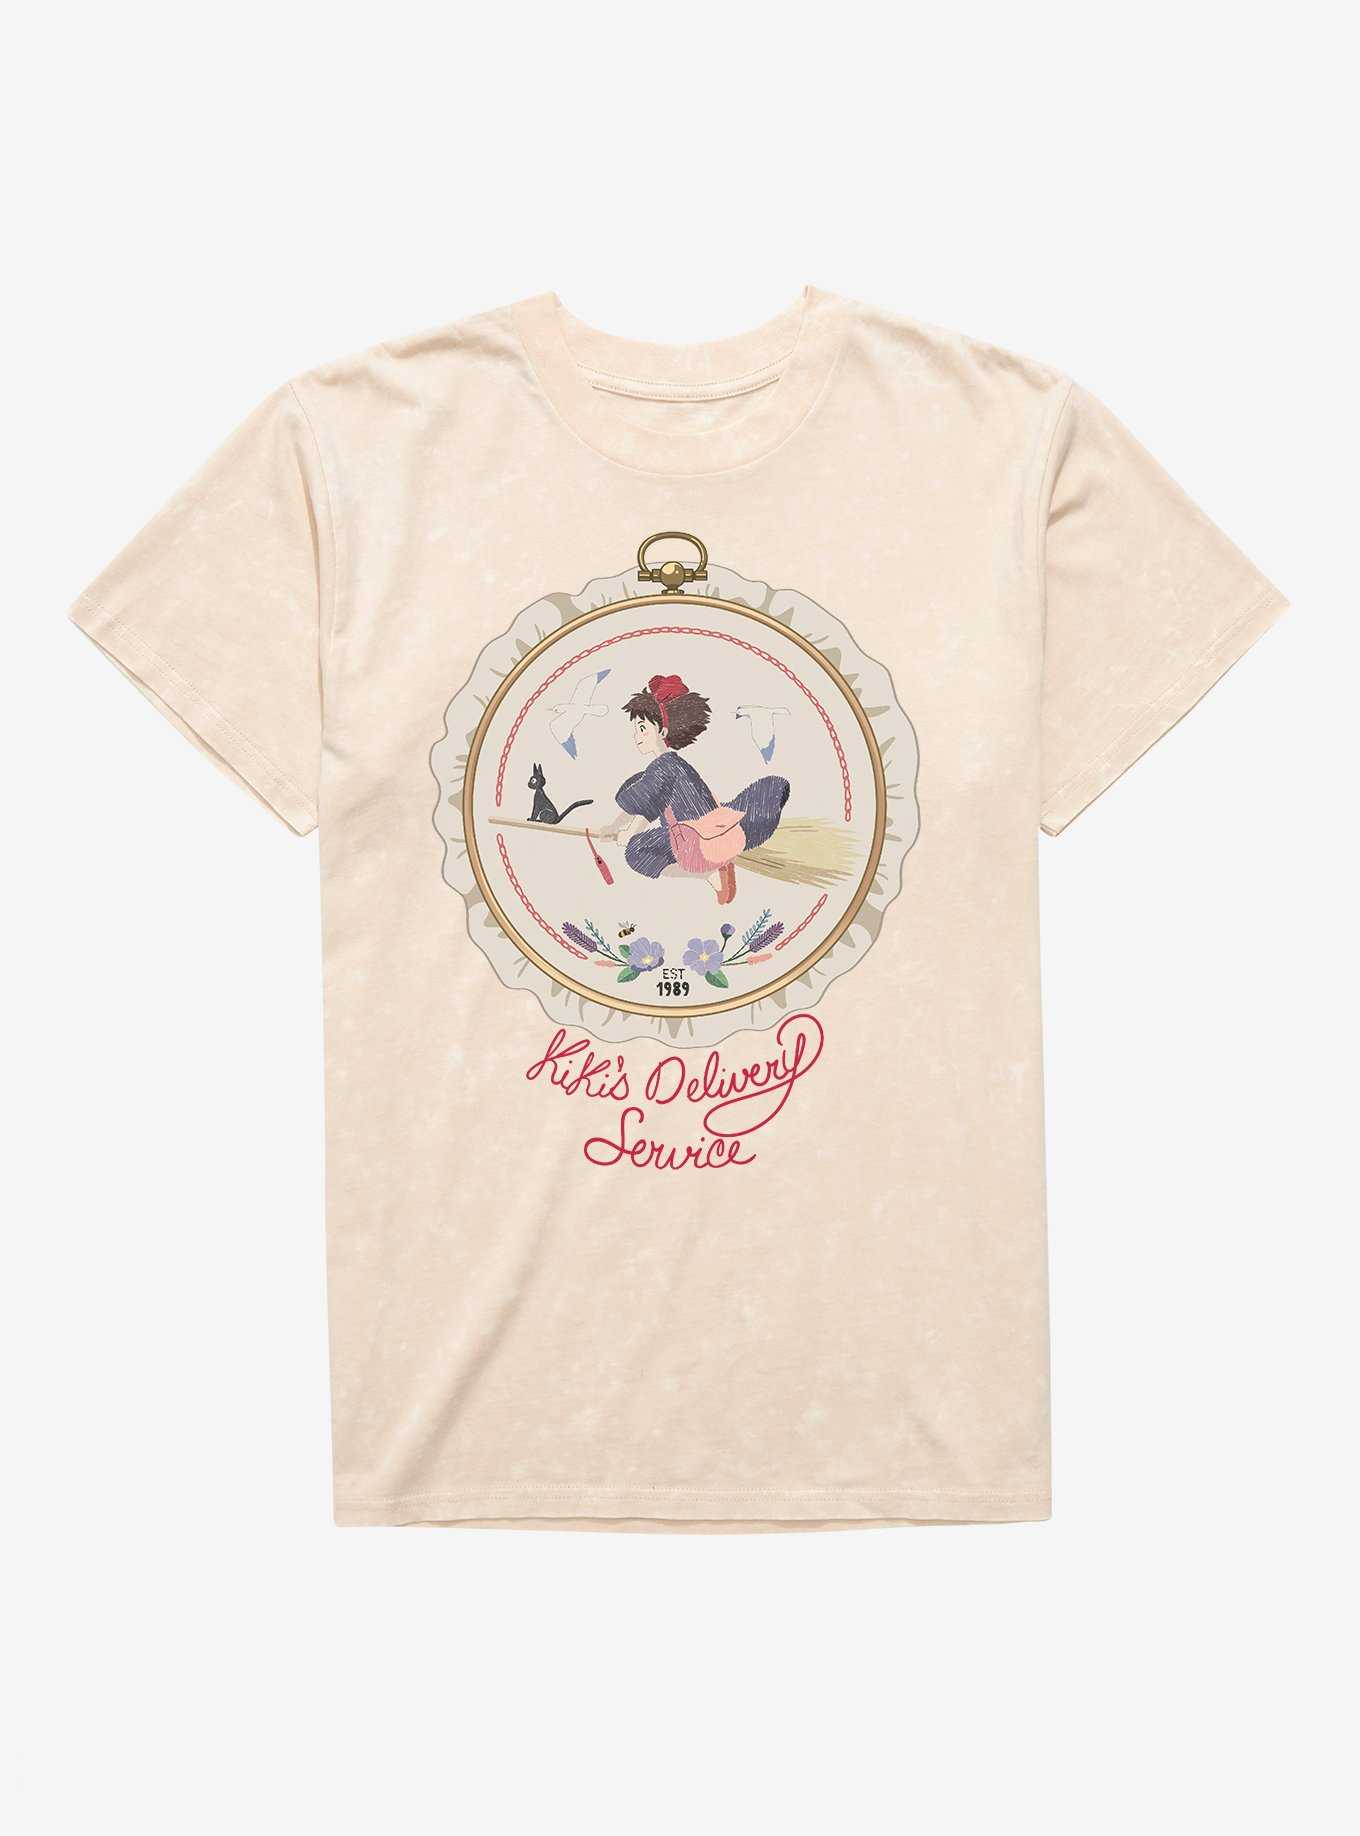 Studio Ghibli Kiki's Delivery Service Sewing Patch Mineral Wash T-Shirt, , hi-res